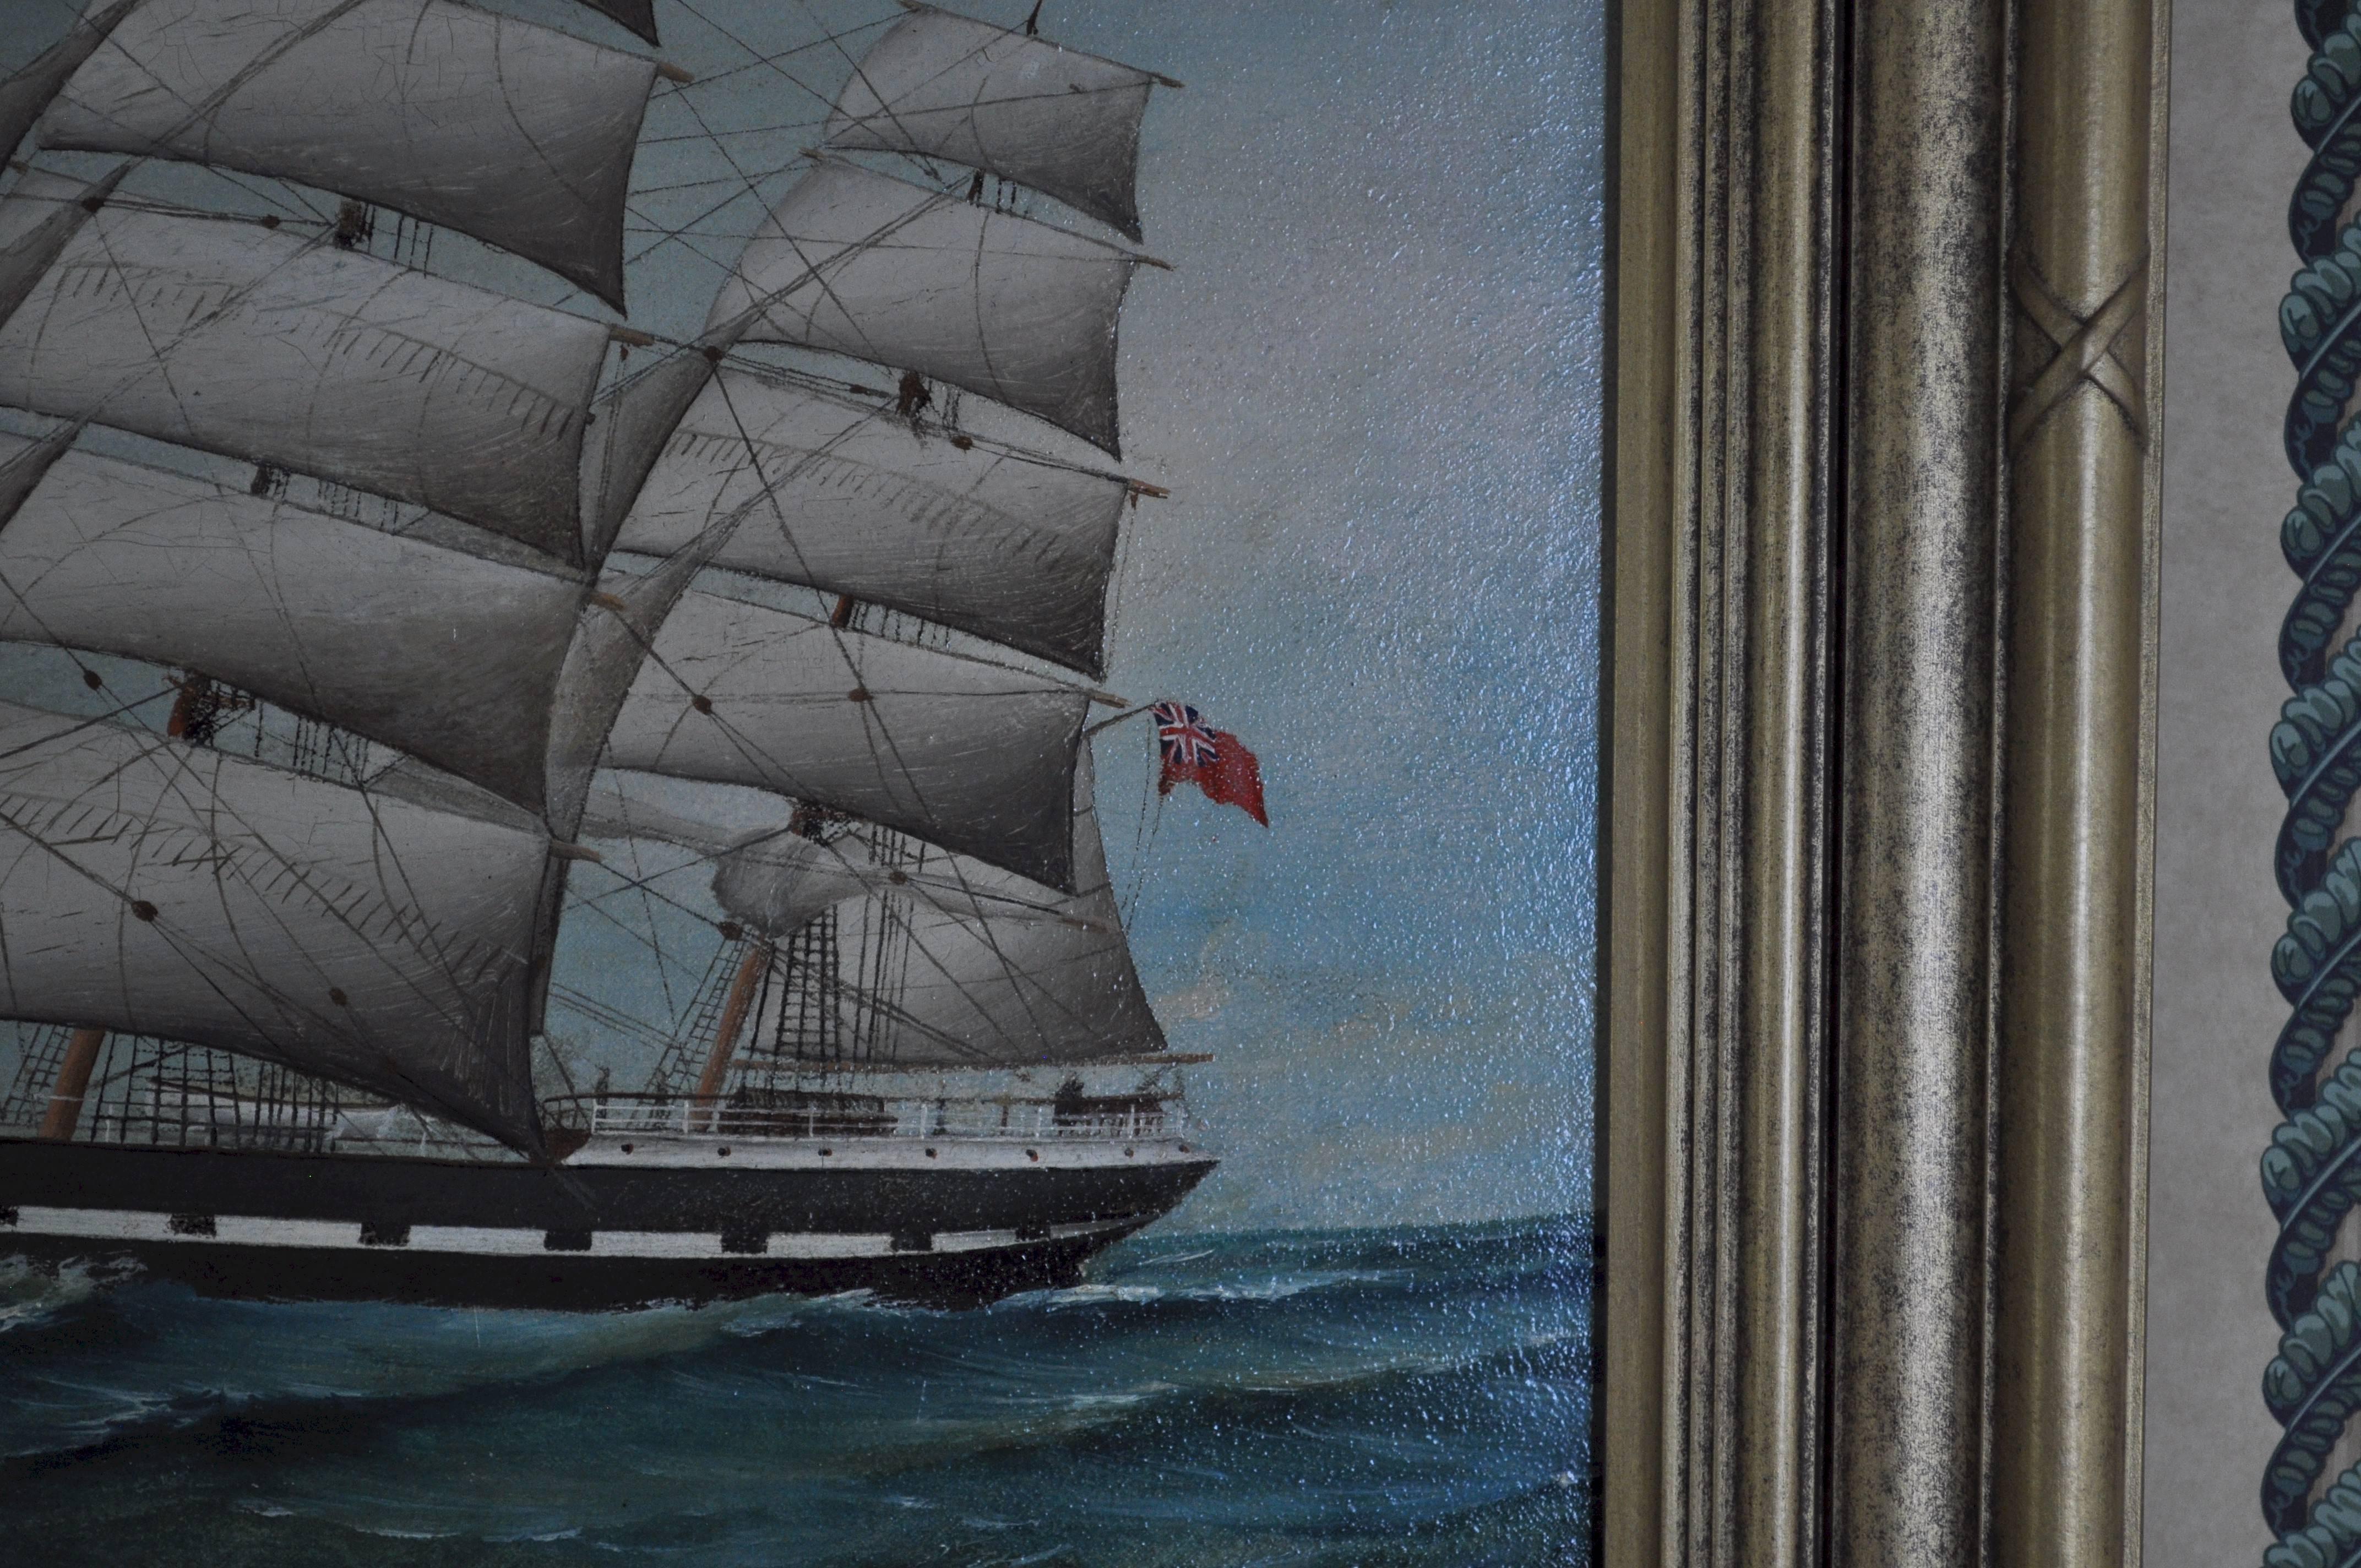 Attributed to Lai Fong of Calcutta; oil on canvas “Romsdal” a four masted barque, unsigned. 19″ x 26″. This oil on canvas has undergone a light clean, strip lining, tensioning and varnish. It is displayed in a new Frinton frame, ready to hang.  Free